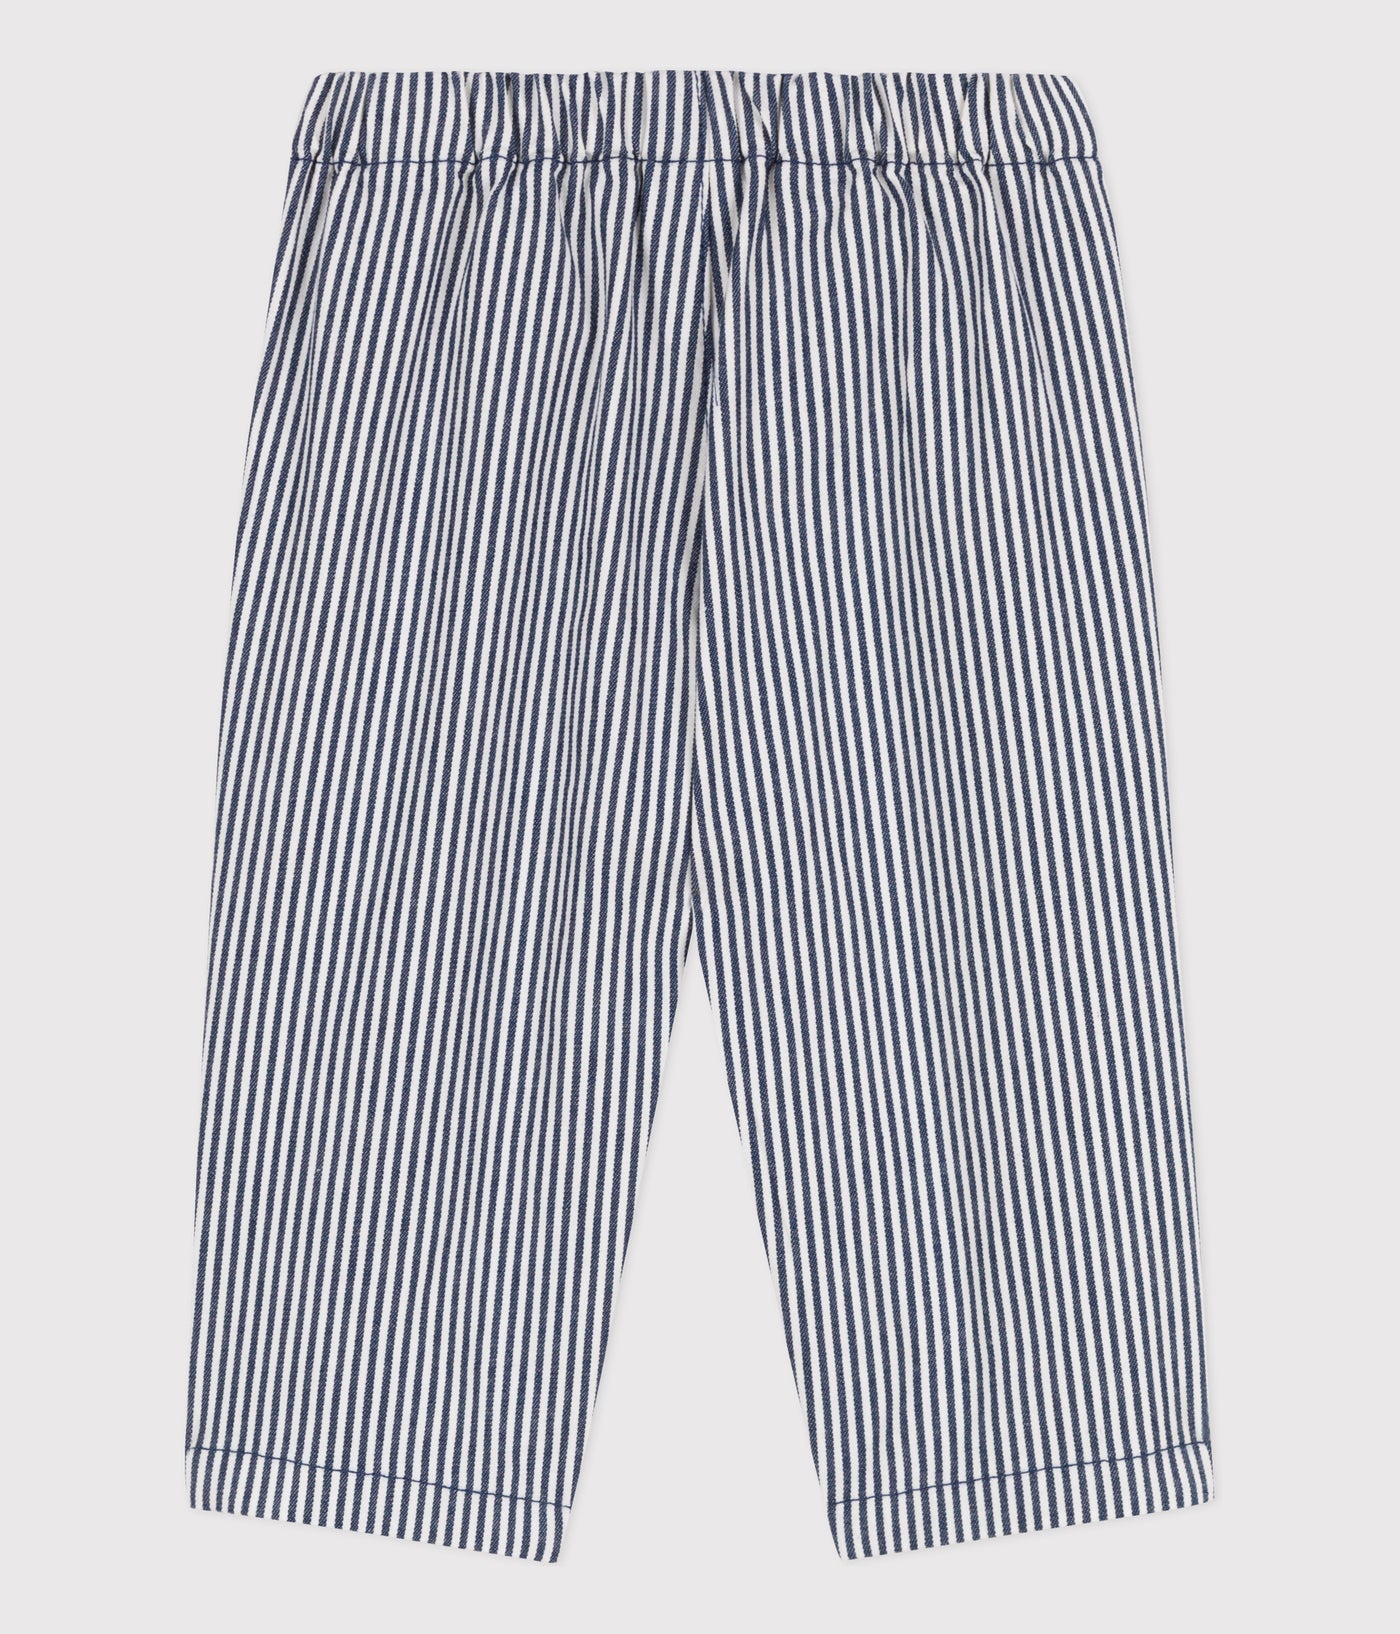 BABIES' STRIPED COTTON TROUSERS